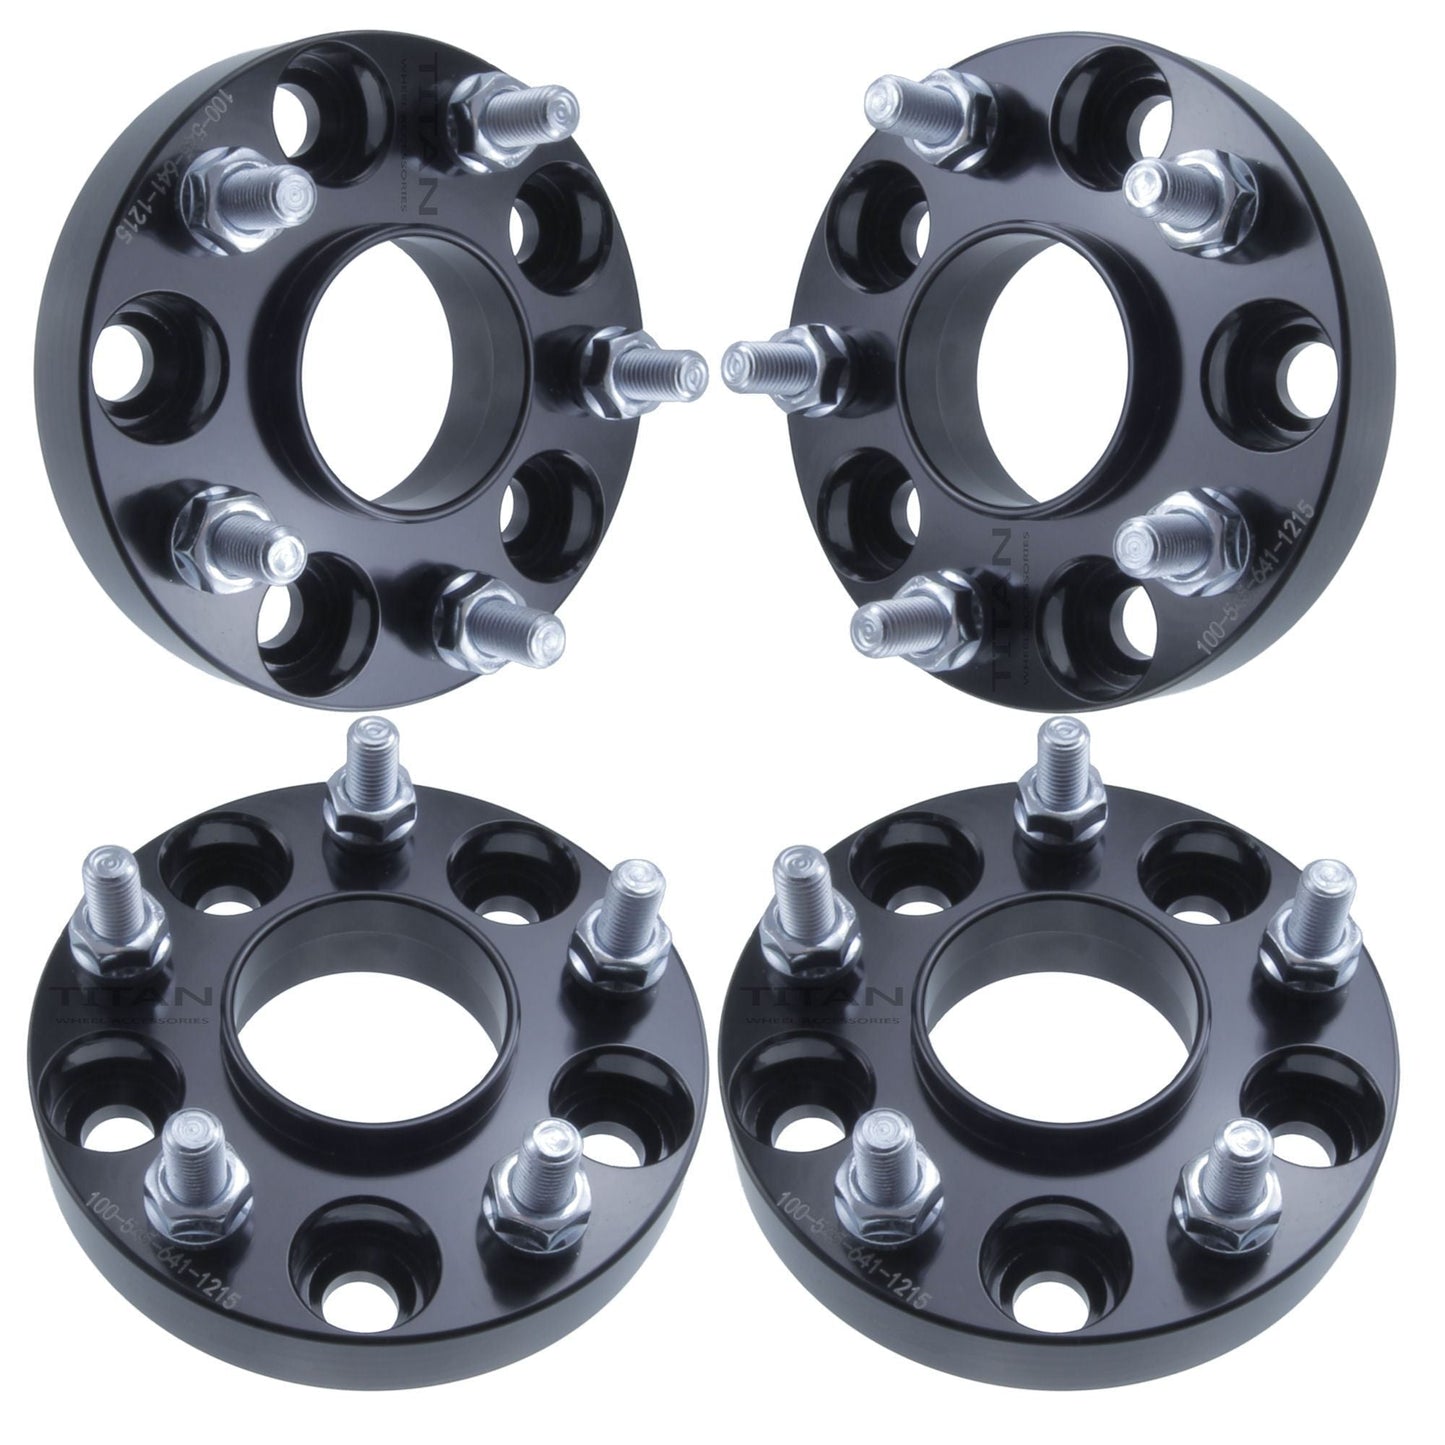 1"  (25mm) Titan Wheel Spacers for Acura and Honda | 5x114.3 | 64.1 Hubcentric | 12x1.5 Studs | Set of 4 | Titan Wheel Accessories